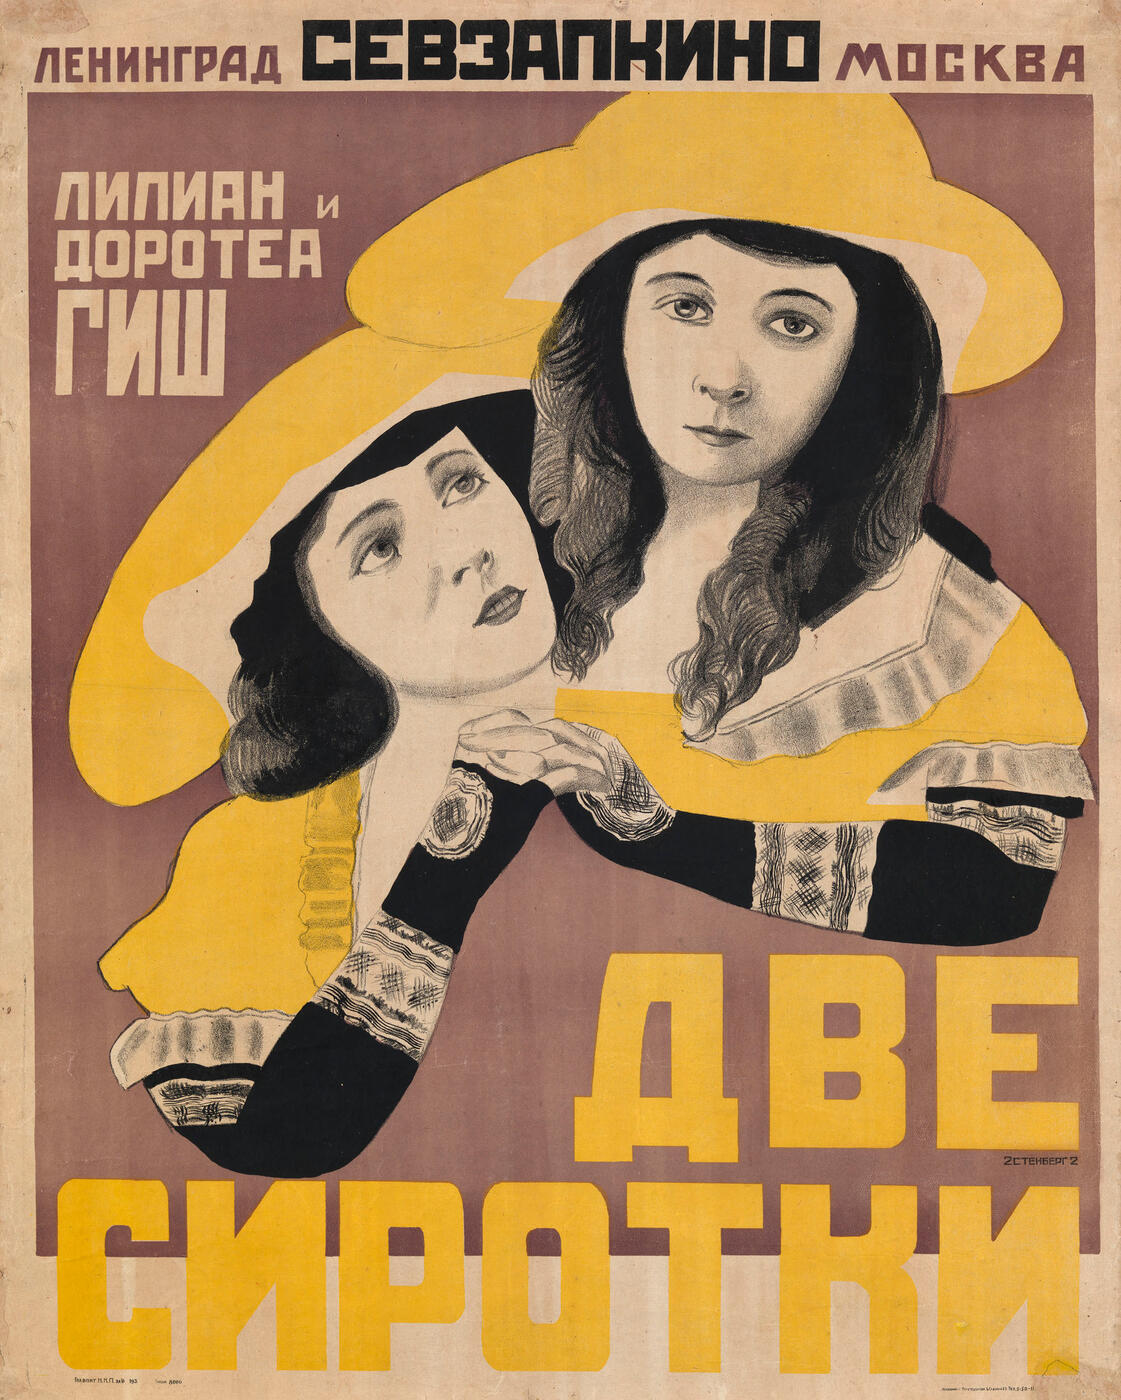 Poster for the D. Griffith Film “Dve sirotki”